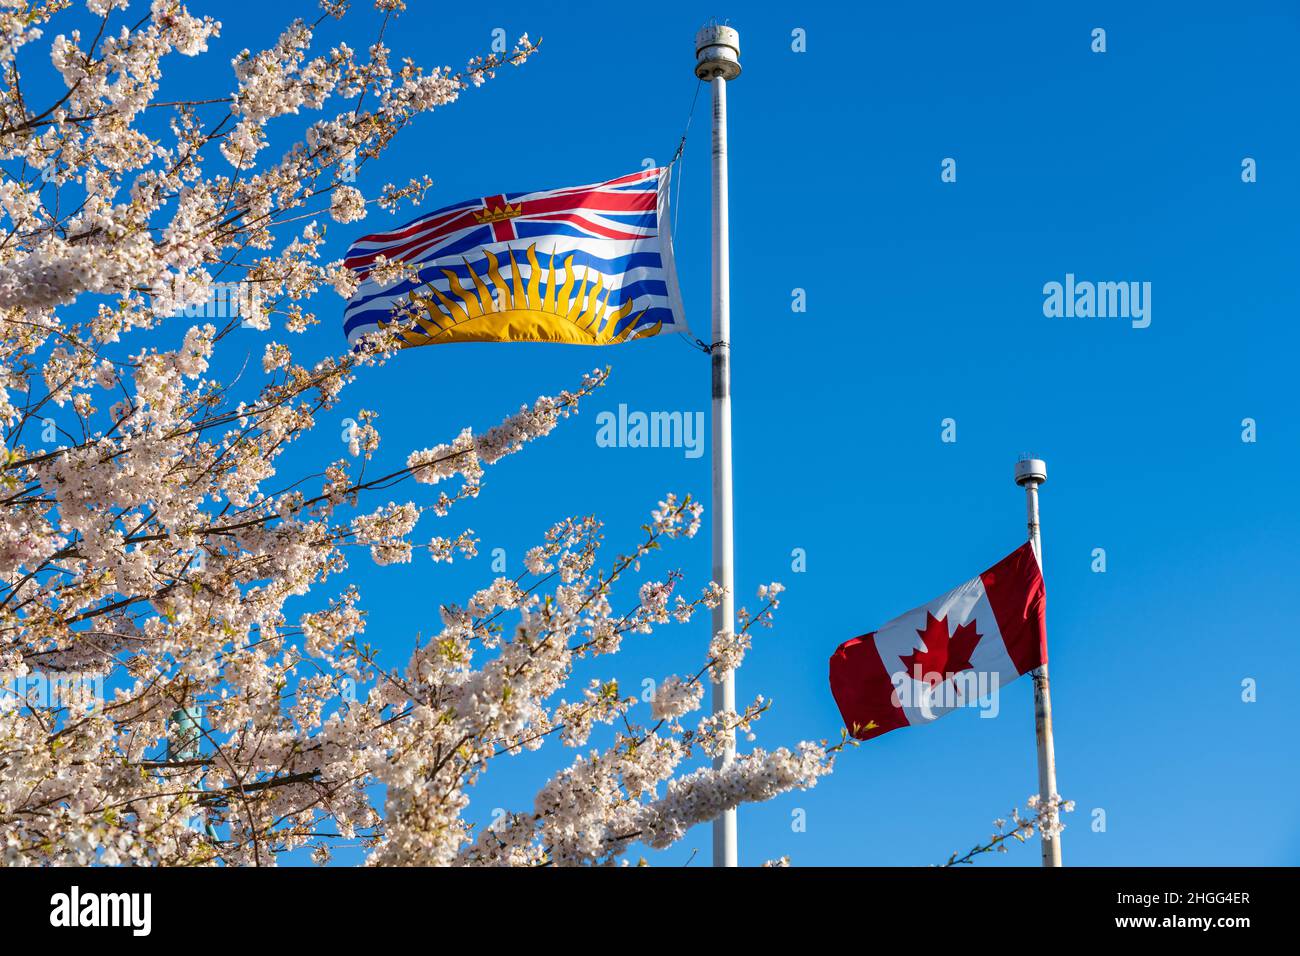 National Flag of Canada and British Columbia flagpole with cherry blossoms in full bloom. Concept of canadian urban city life in spring time. Stock Photo